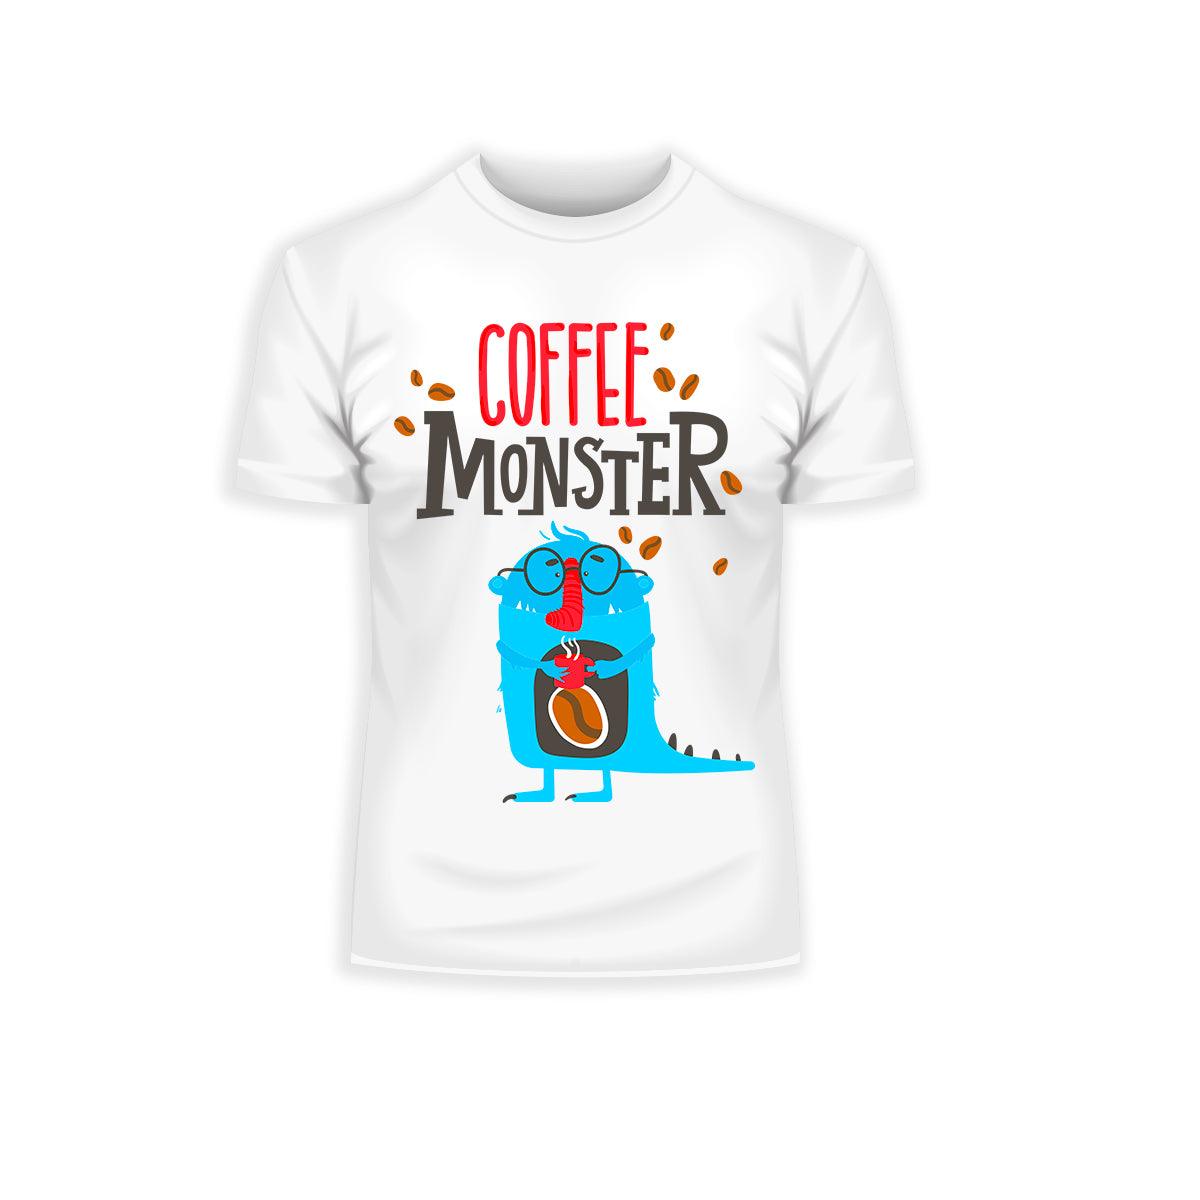 Coffee Monster T-shirts for Caffeine Freaks With An Attitude - Kuzi Tees